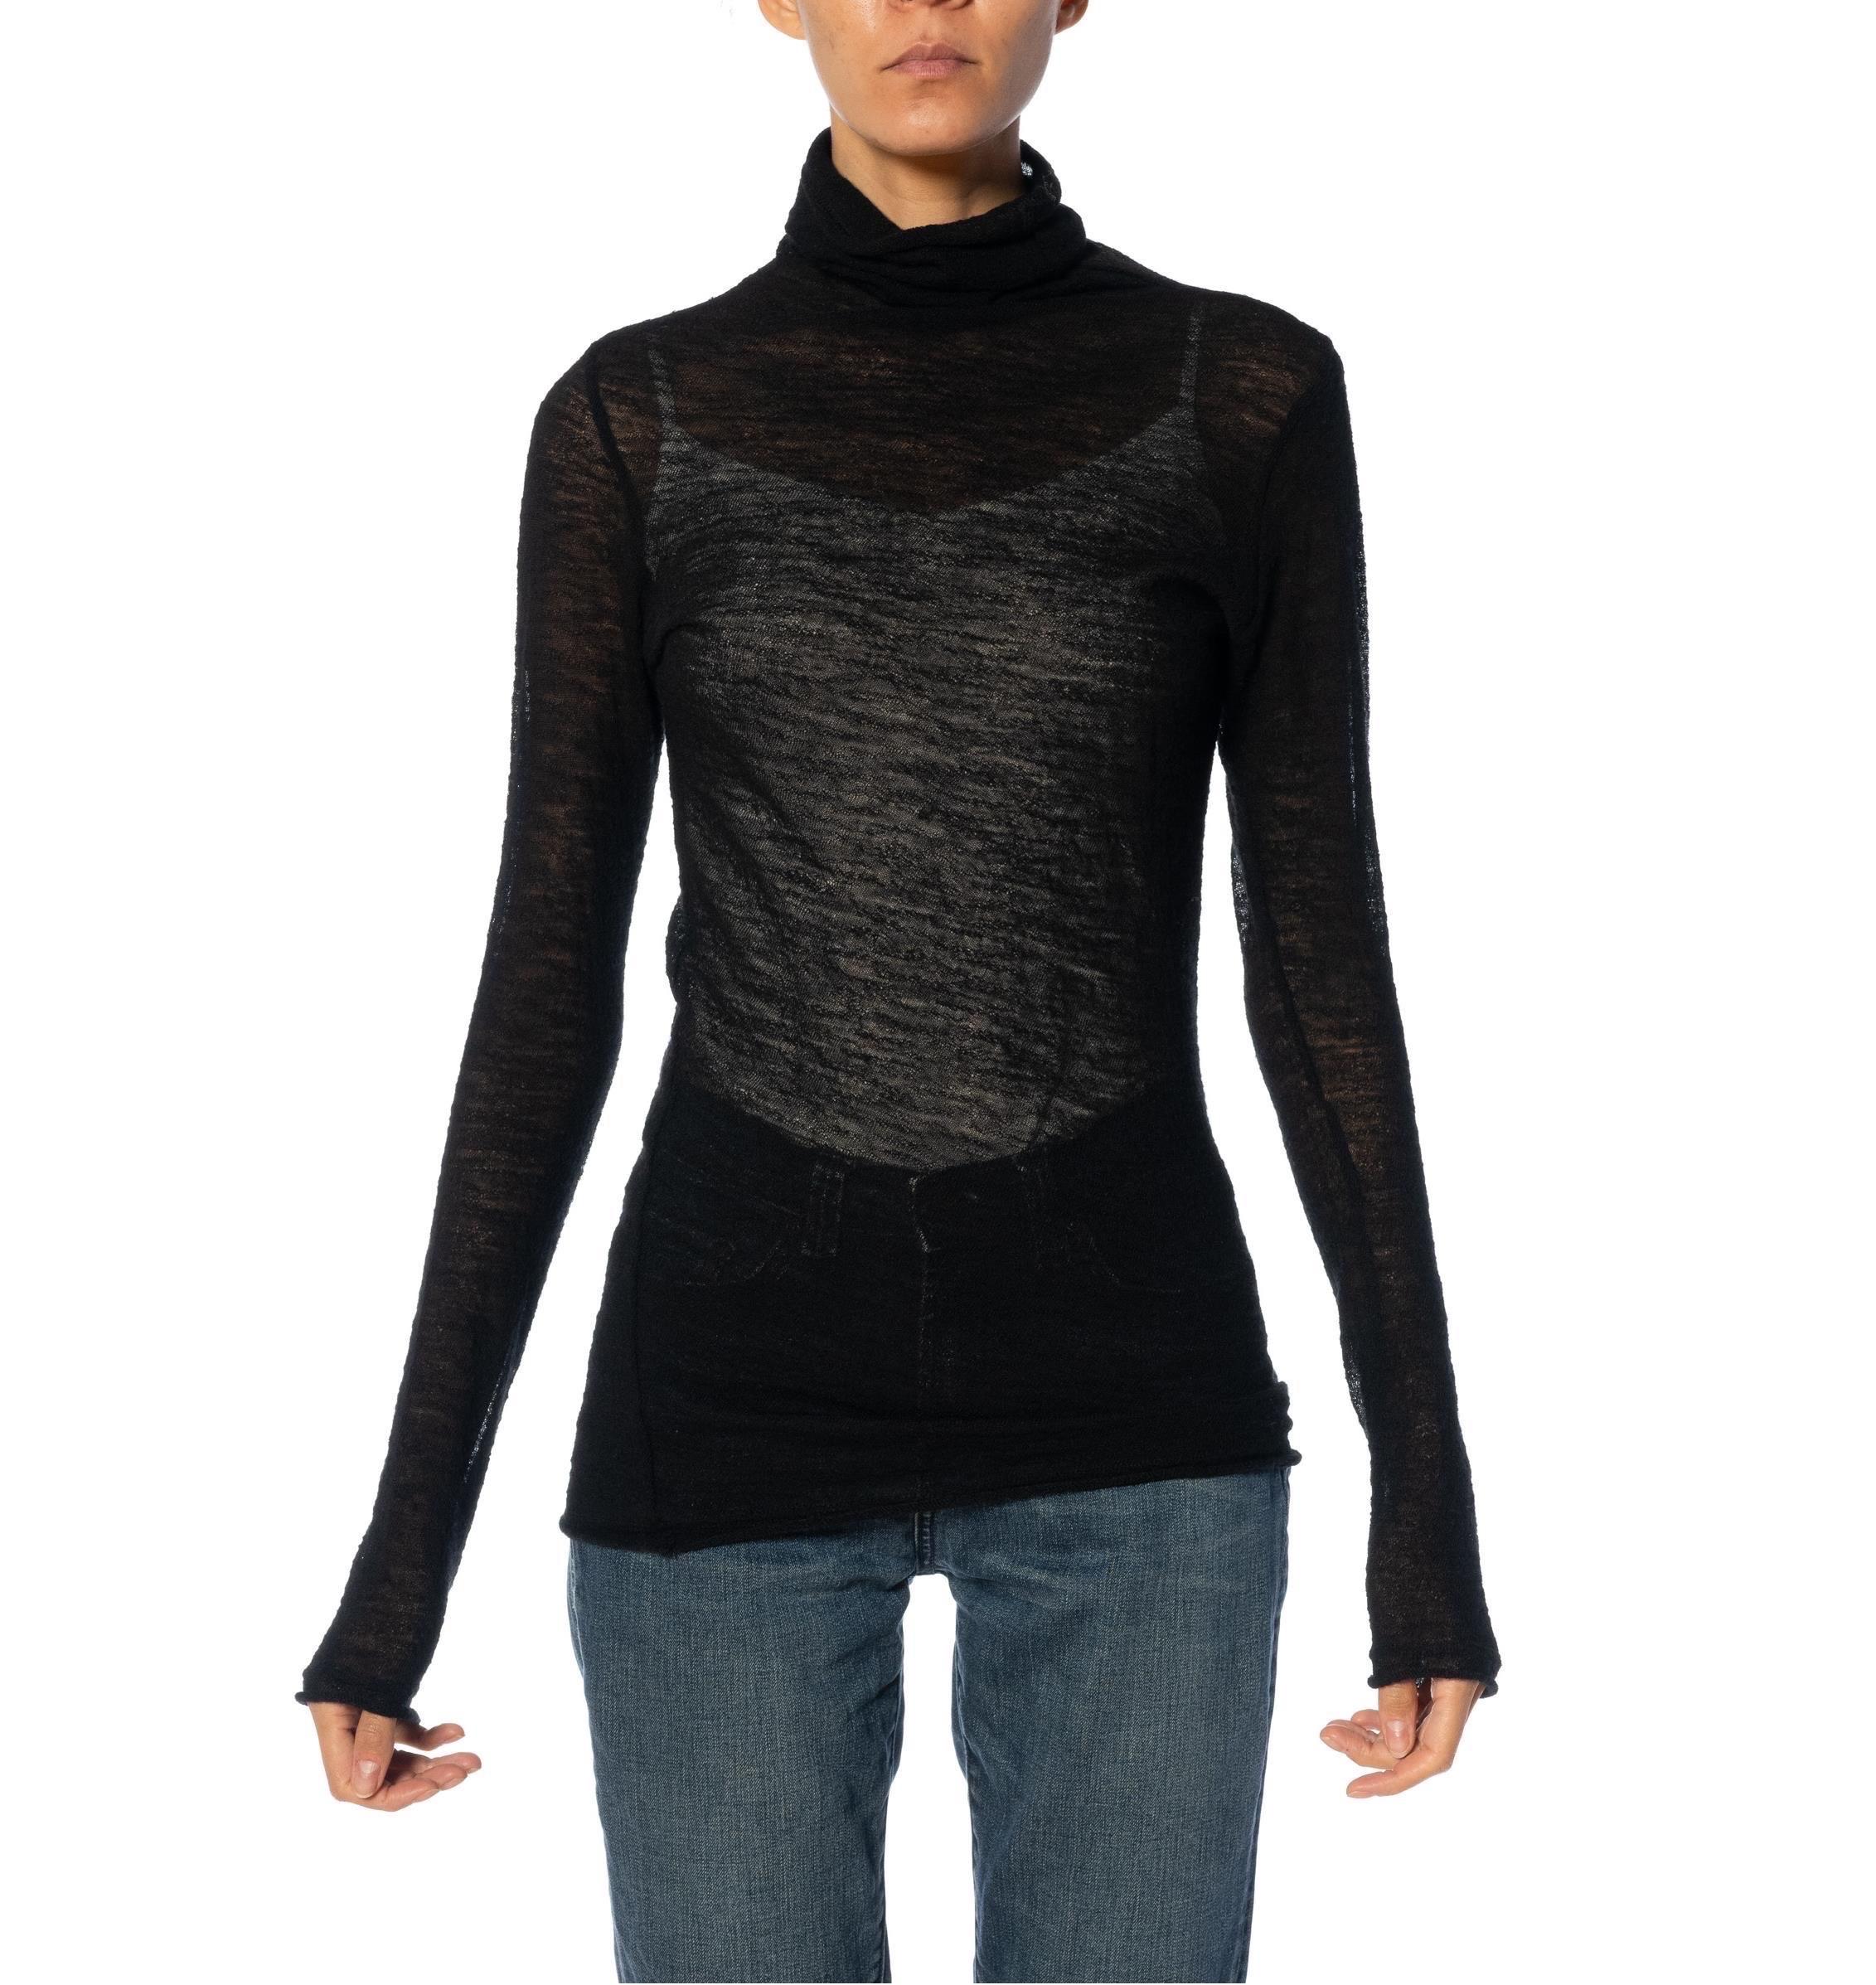 1990S Y’S YOHJI YAMAMOTO Black Wool Sheer Turtleneck Sweater In Excellent Condition For Sale In New York, NY